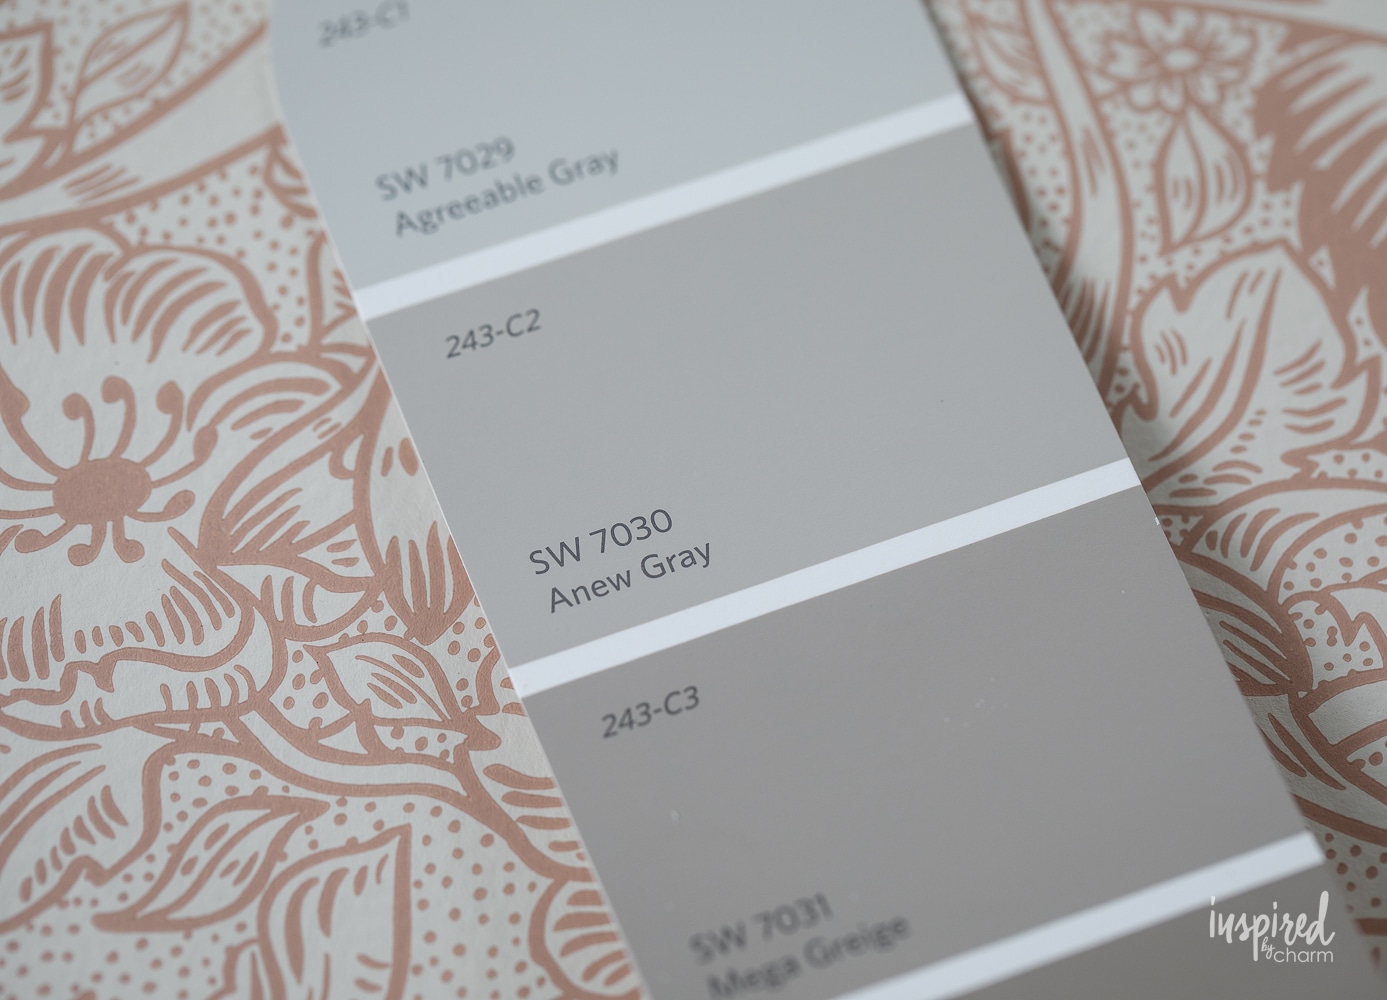 sherwin Williams anew gray paint sample card strip.